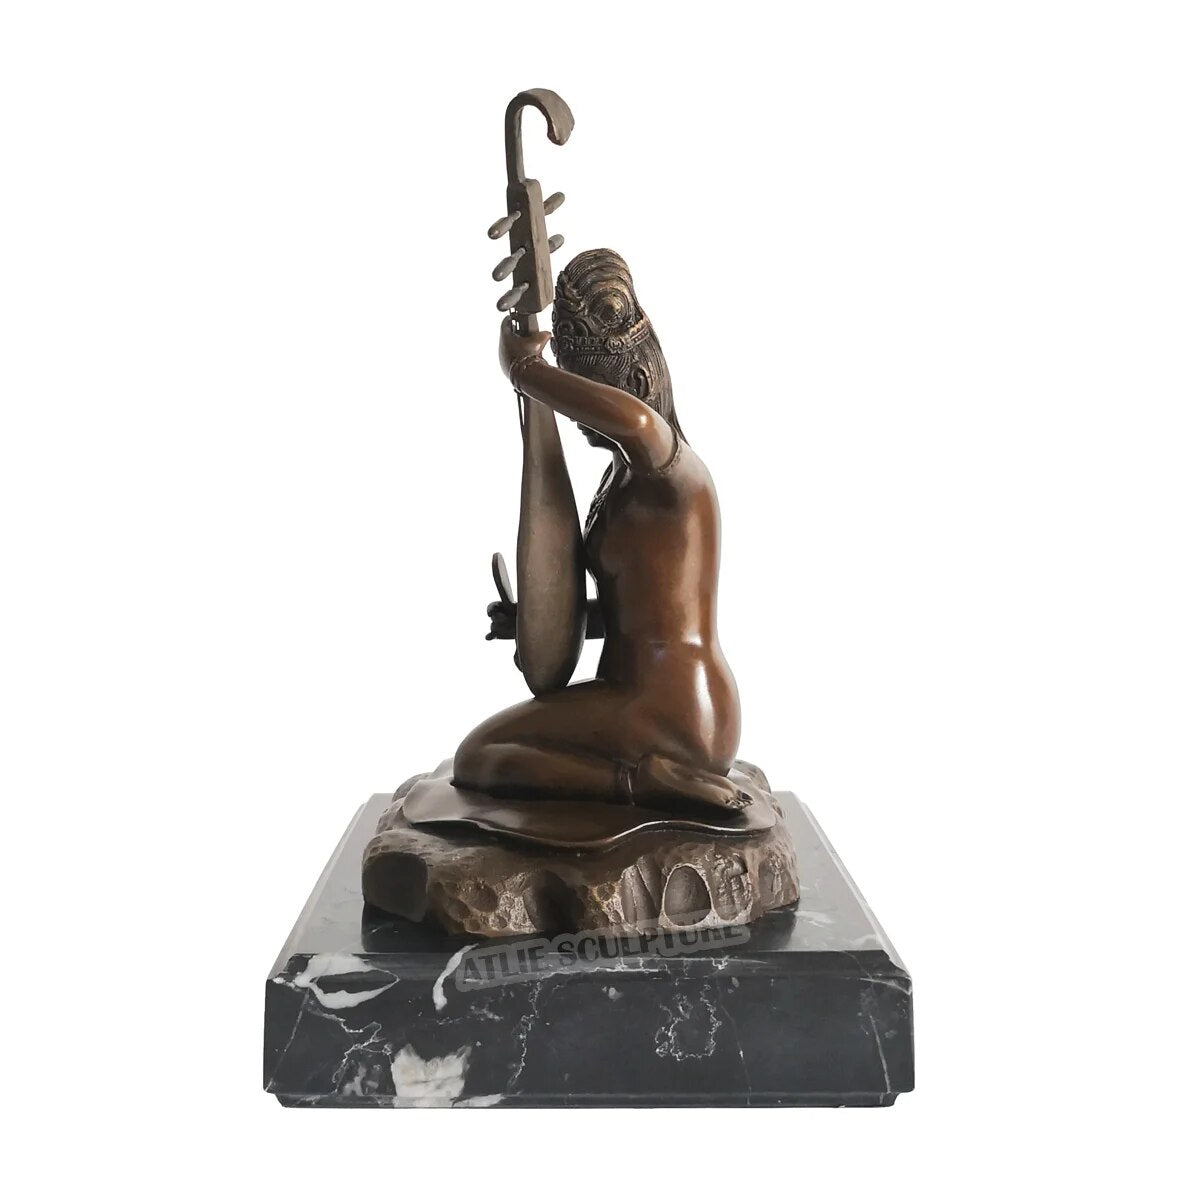 Exquisite 8.5-inch Bronze Goddess Saraswati Sculpture on Marble Base: A Harmonious Blend of Artistry and Divinity